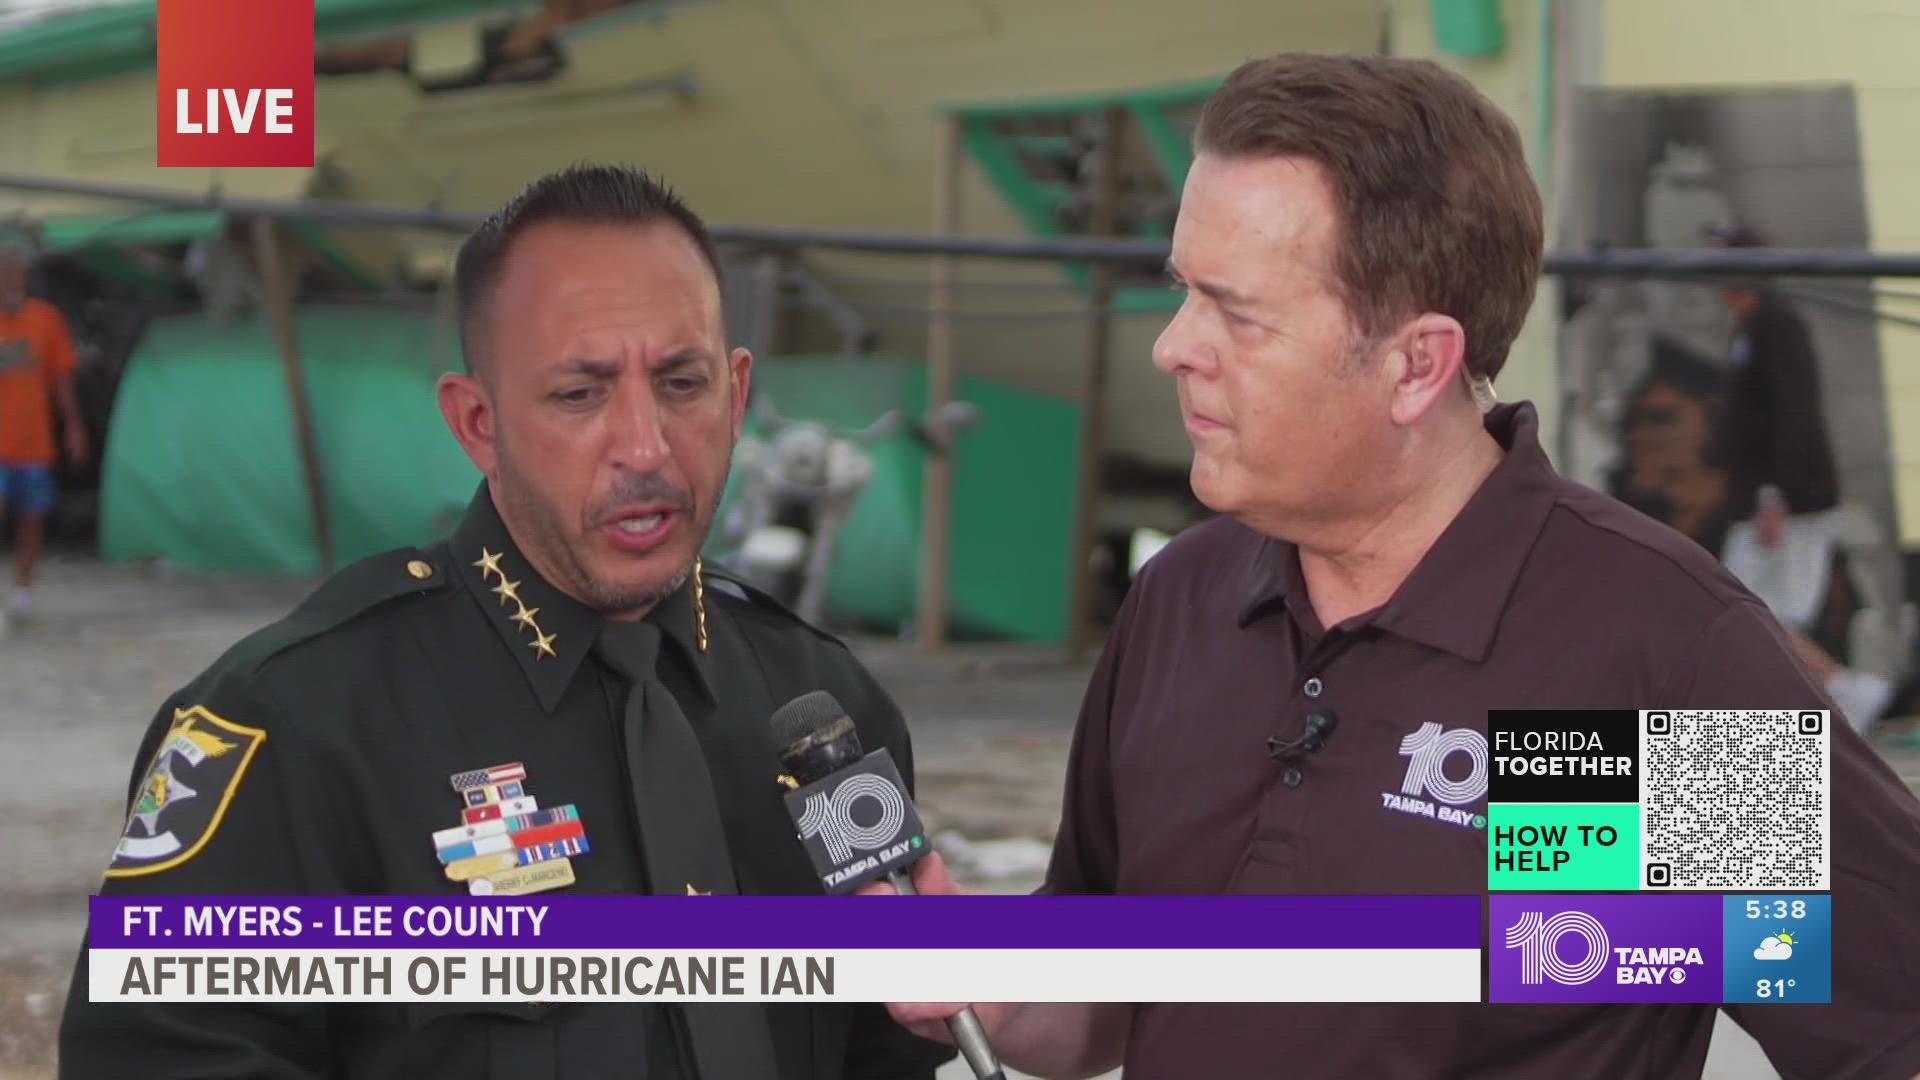 Sheriff Marceno said it makes him happy to see people come out and help others throughout the devastation brought by Hurricane Ian.